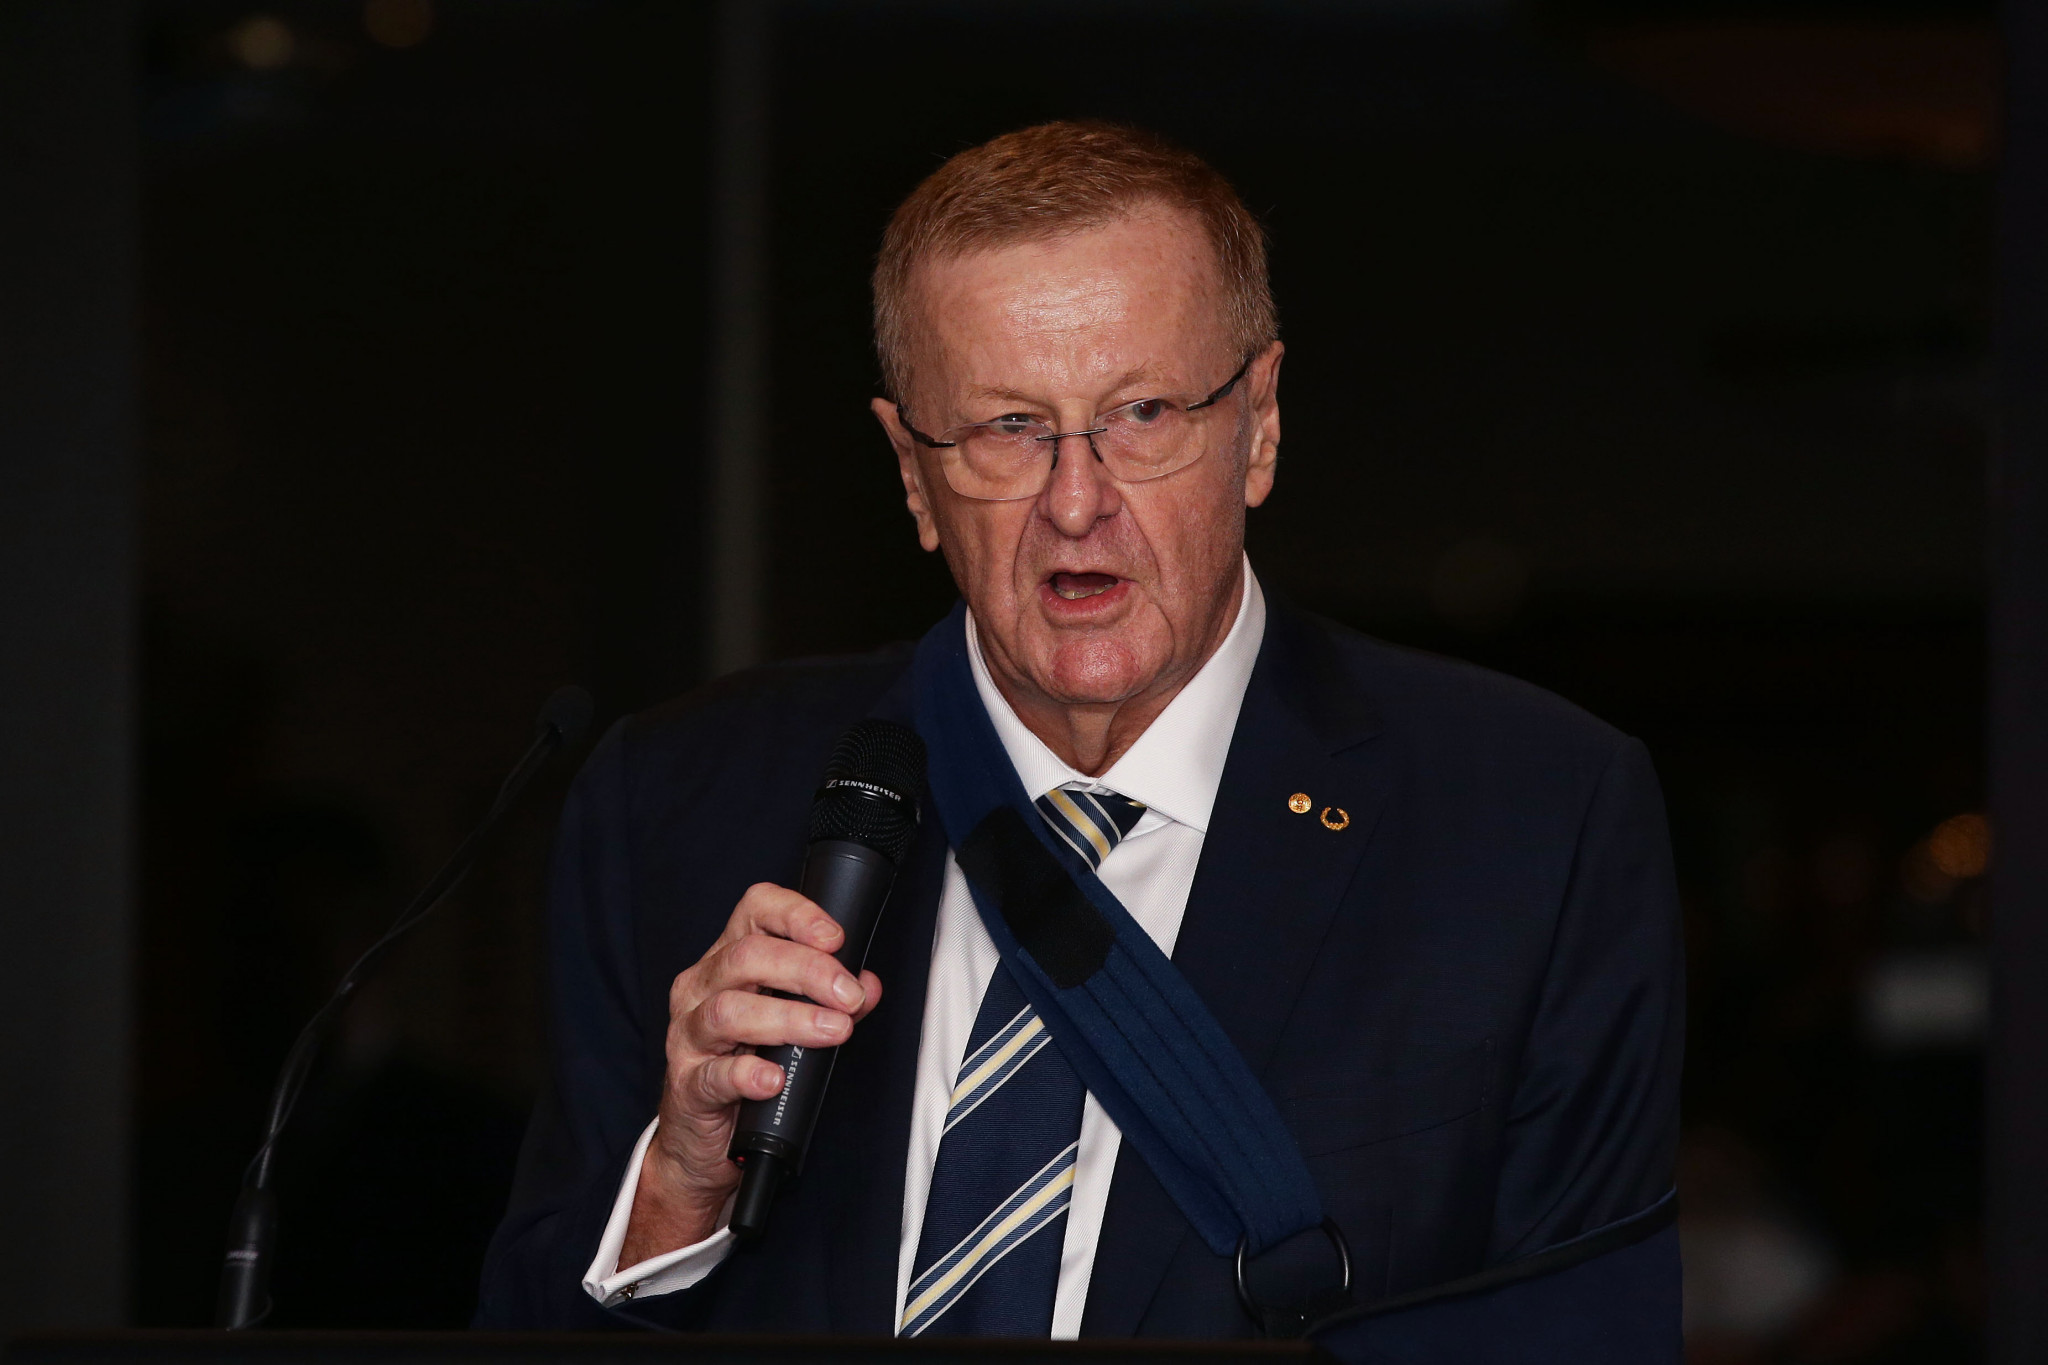 ICAS President John Coates said the ITU should be congratulated for the move ©Getty Images